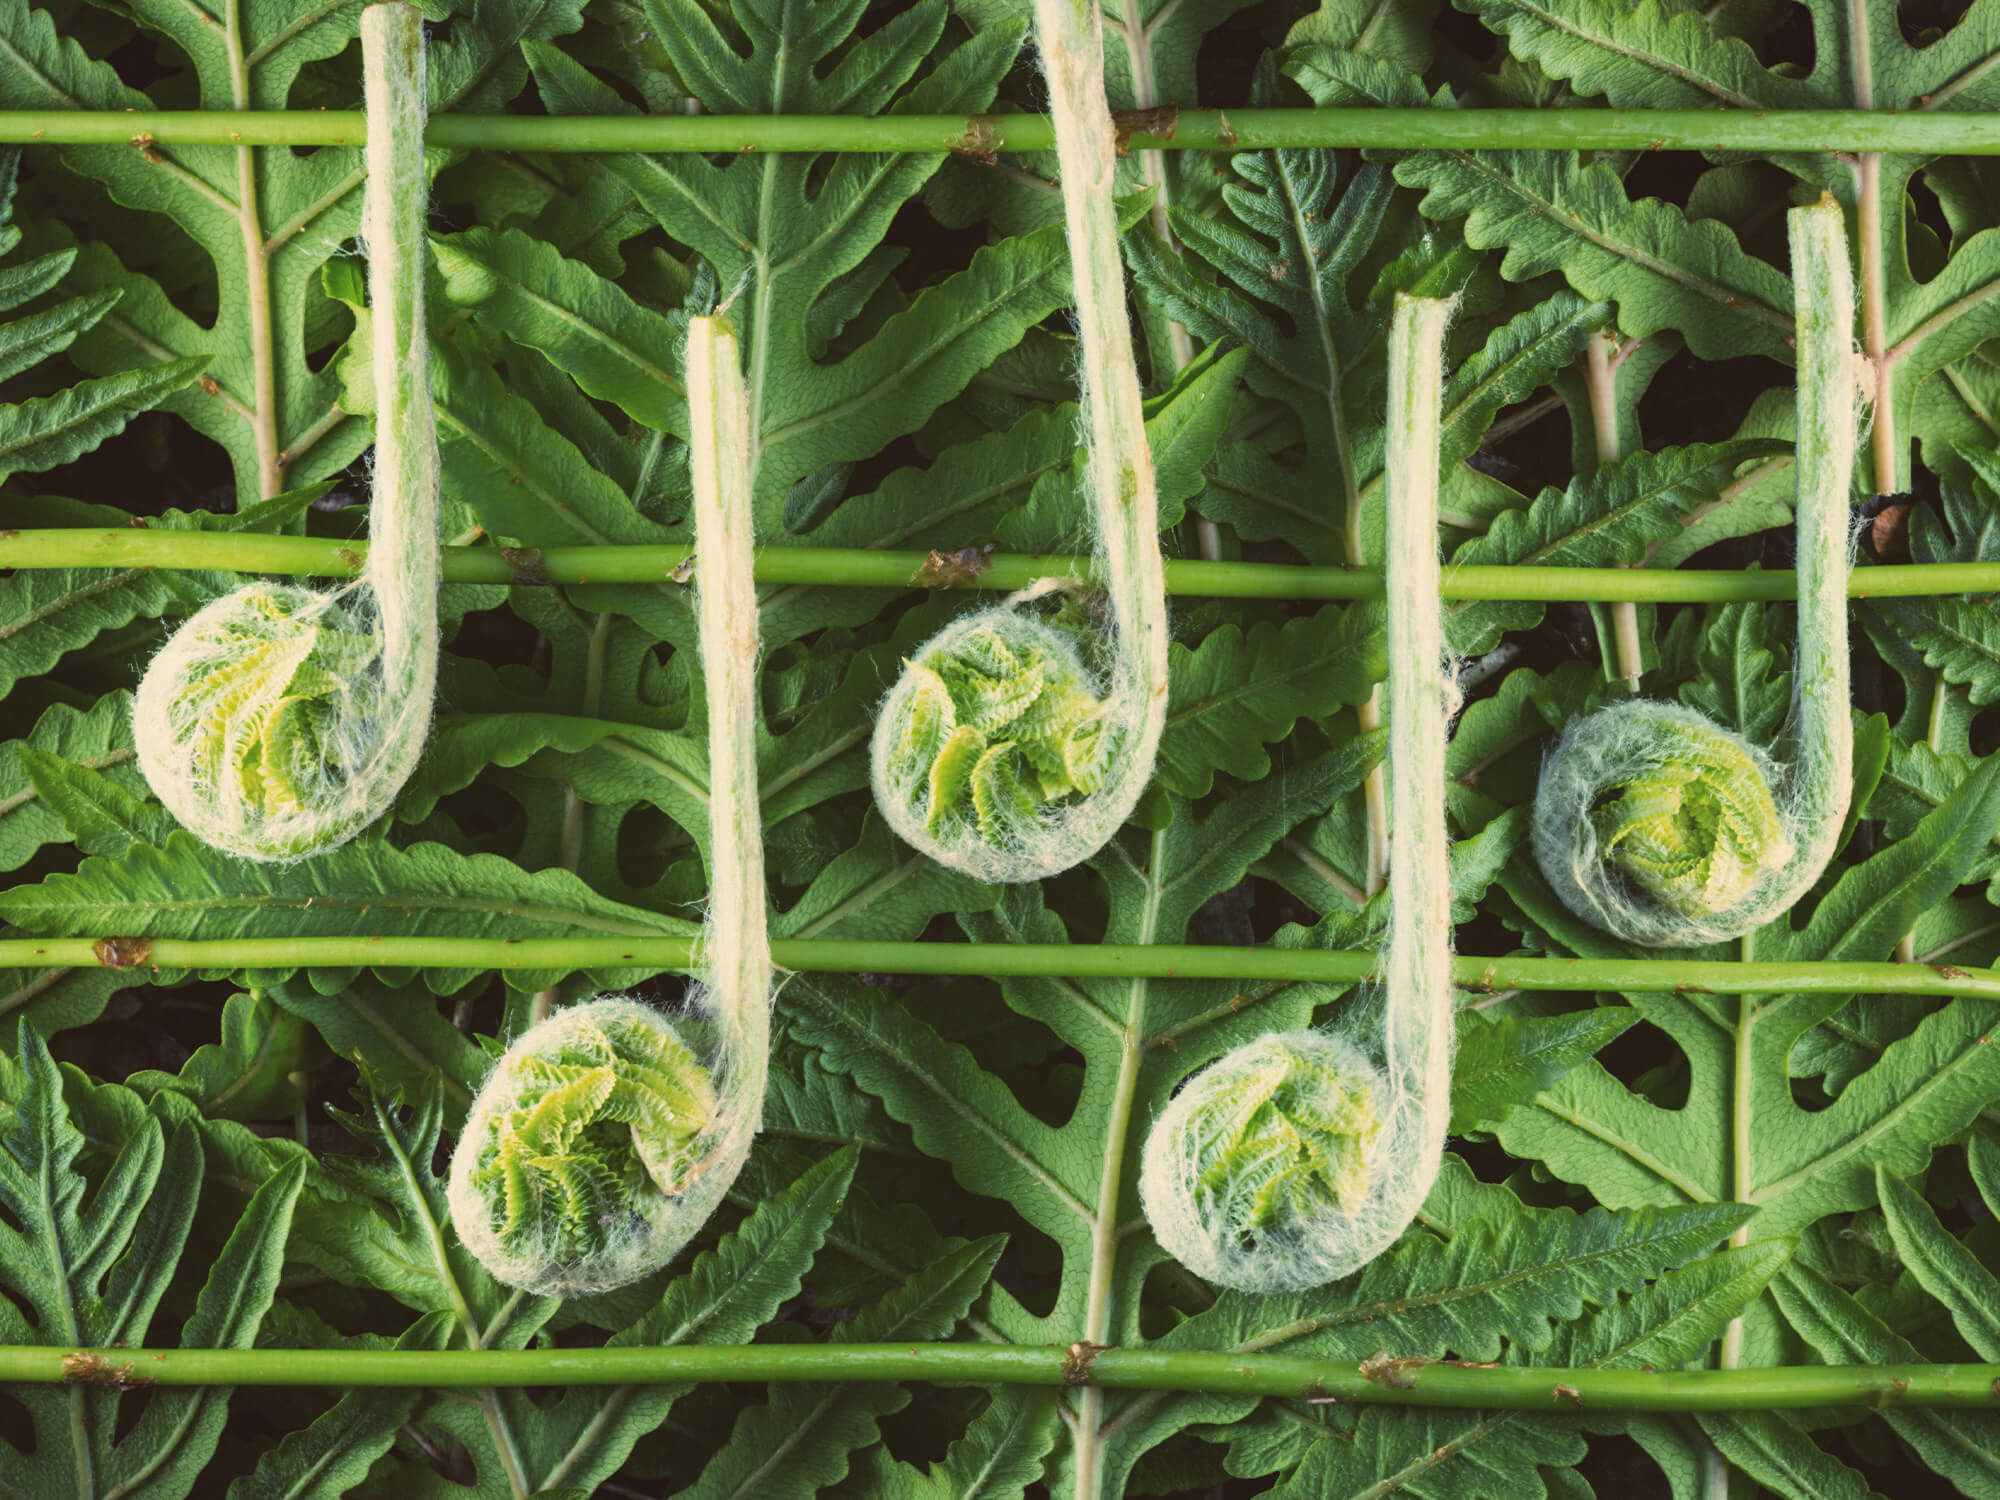 Music notes made of plant stems and rolled up ferns on a bed of plant leaves